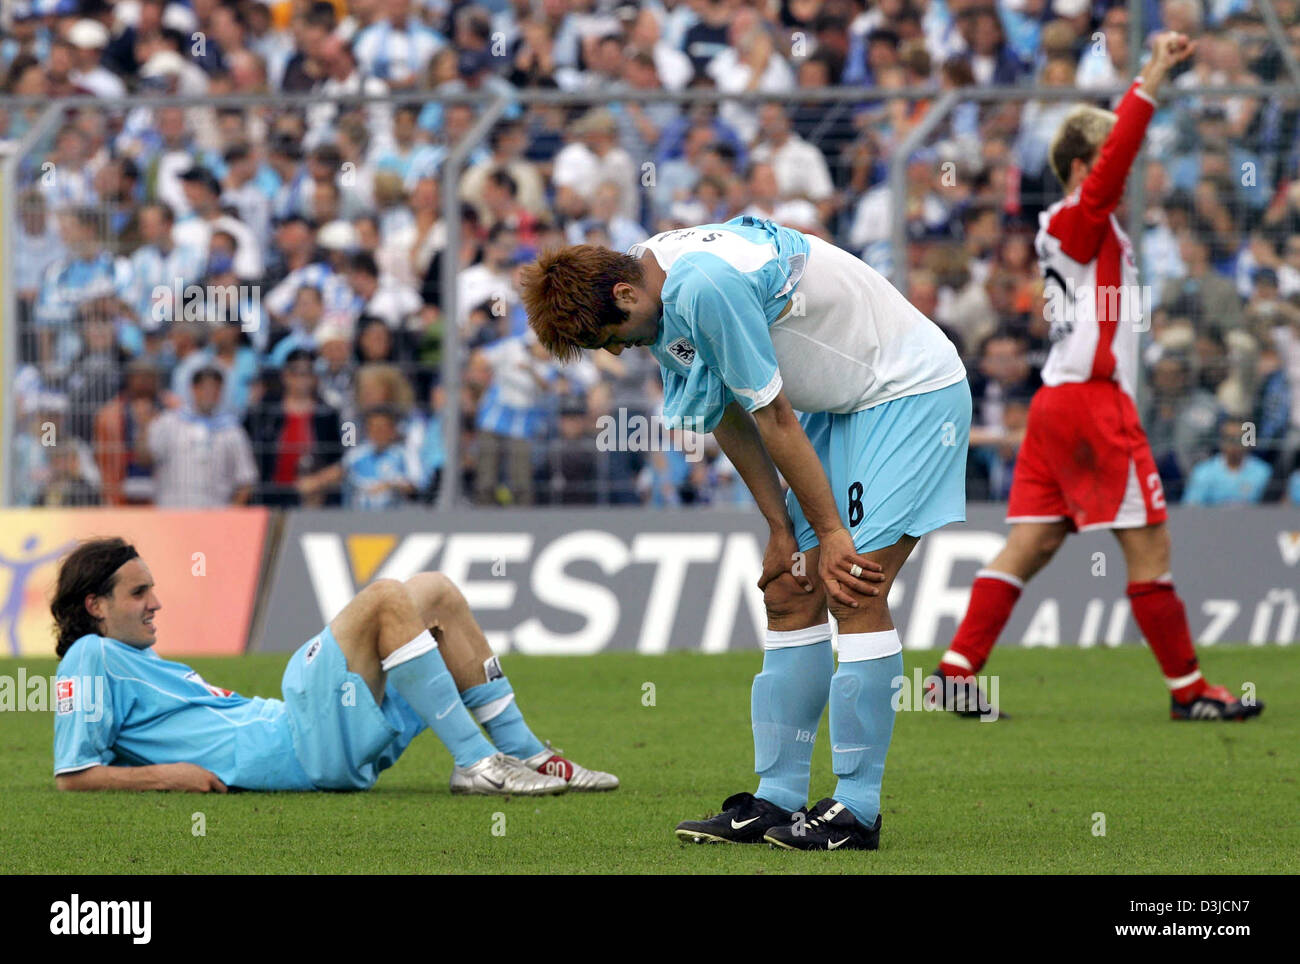 (dpa) - Players Remo Meyer (L) and Jiayi Shao (C) of soccer club TSV 1860 Munich look extremely depressed after their 3-4 defeat against LR Ahlen in the Second Bundesliga match at the Gruenwalder stadium in Munich, Germany, 22 May 2005. Munich failed to qualify for Germany's top soccer division. Stock Photo